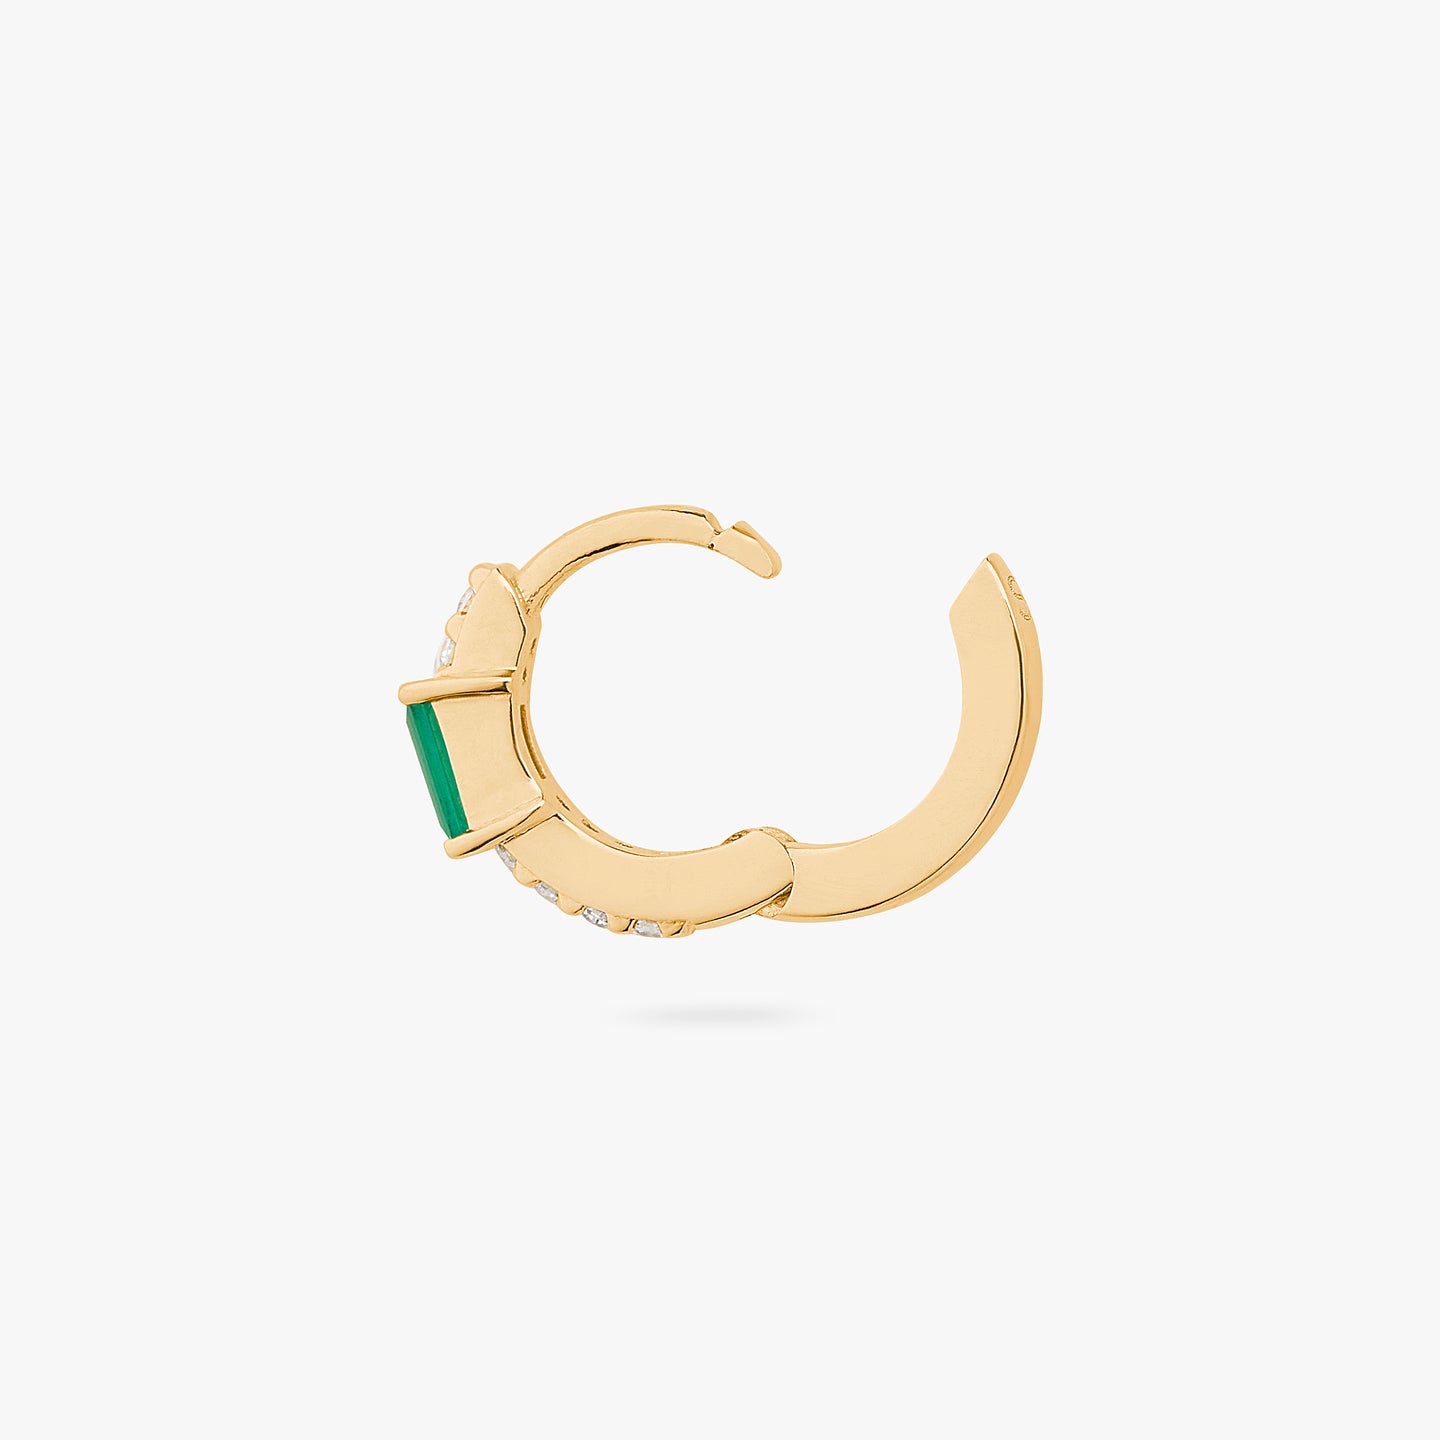 An image of a gold/clear huggie with a green accent baguette CZ stone unhinged. color:null|gold/green